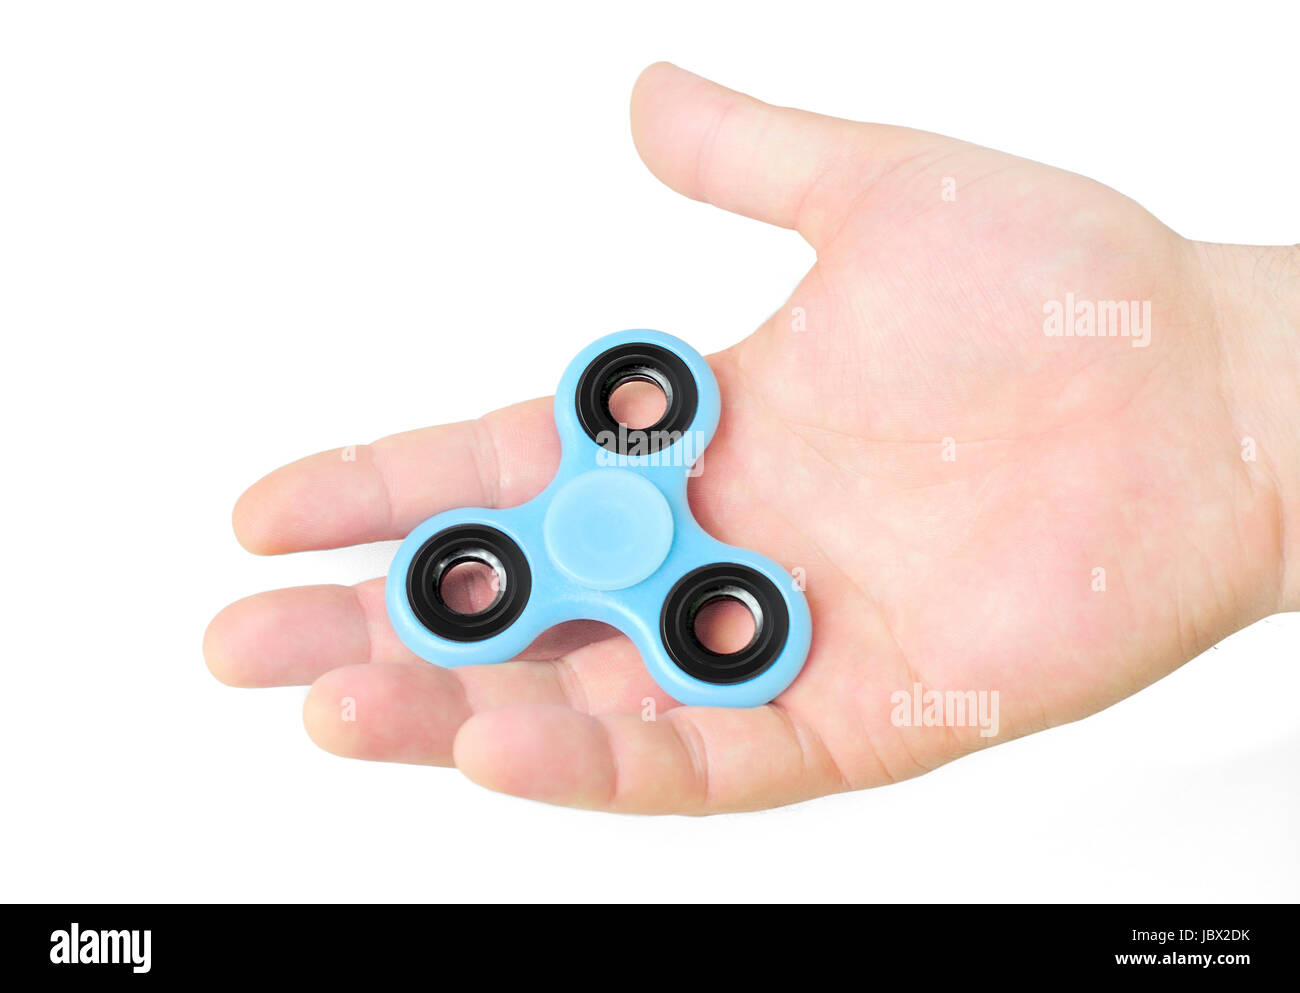 Male hand holding blue fidget spinner in palm, isolated on white background Stock Photo